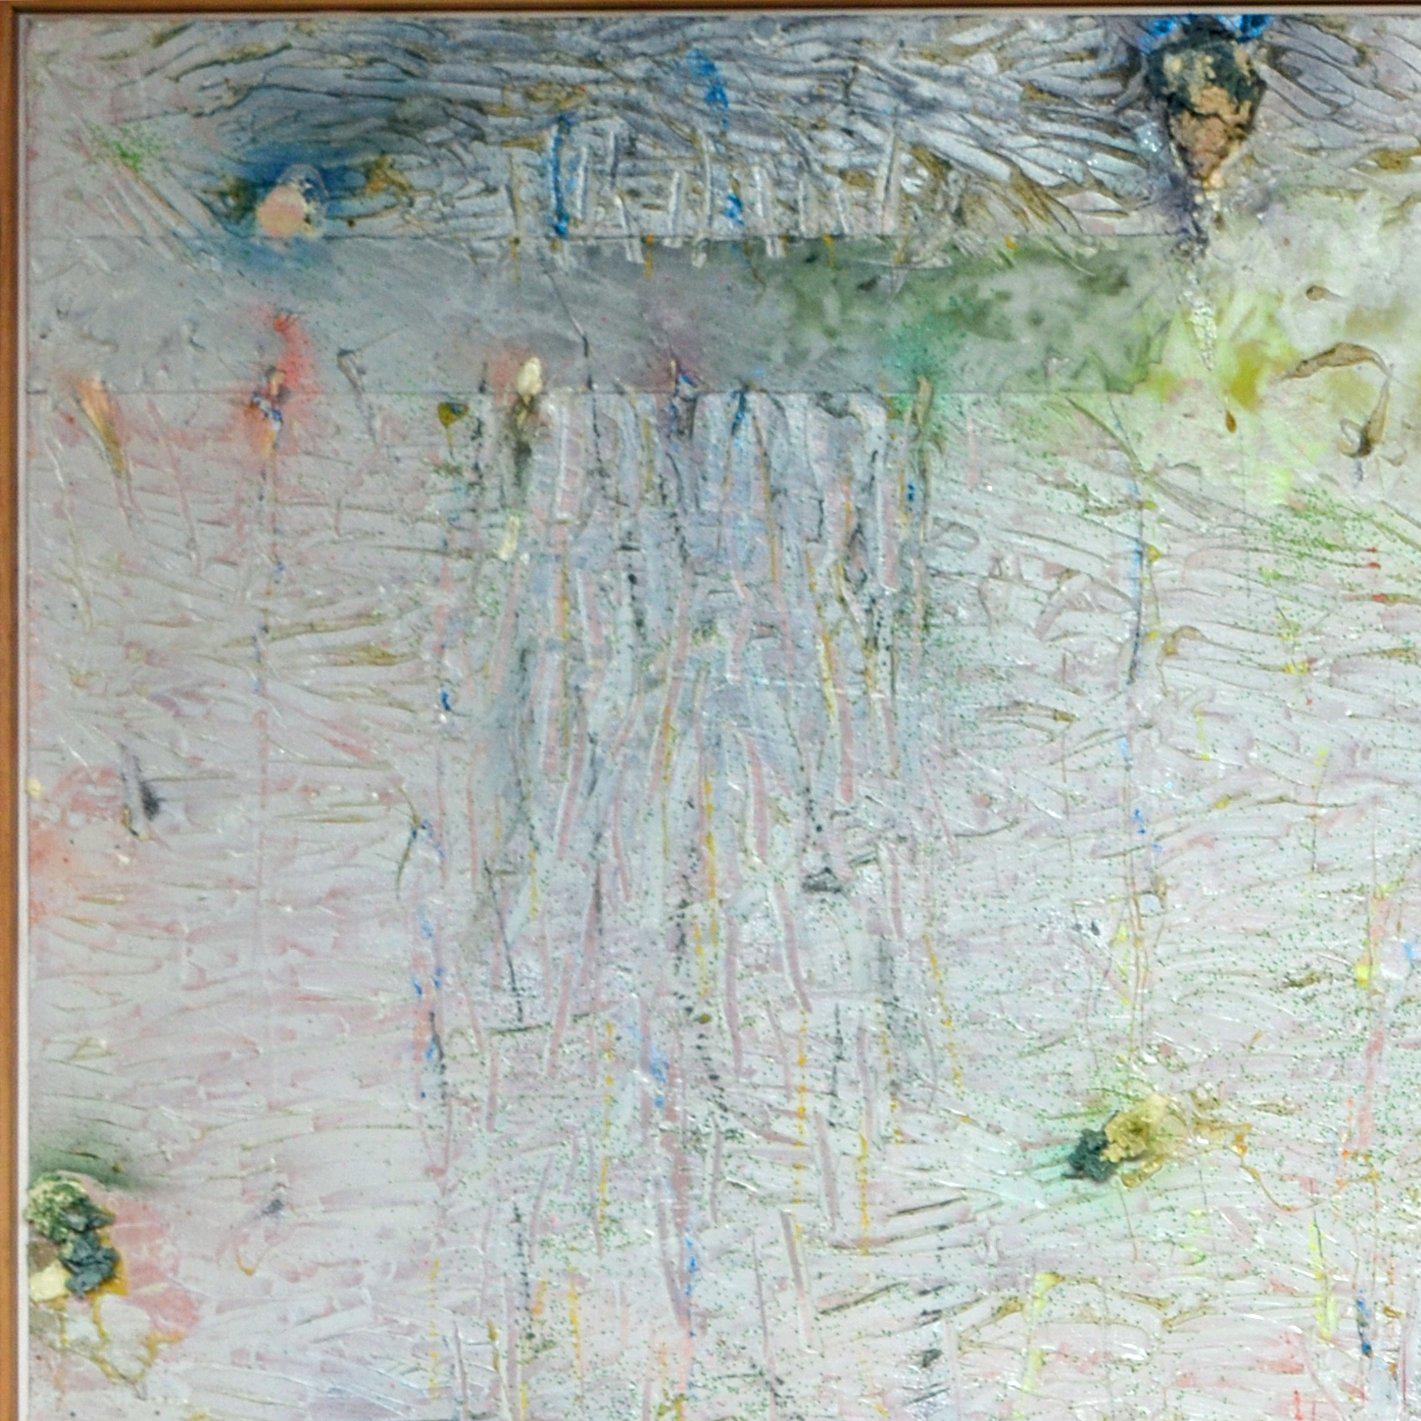 Memoire of a Moment by Stanley Boxer, 1996. Oil and mixed media on canvas, 50.5 x 60.5 inches. This mixed media work has an active surface that is thickly painted, with defined brush strokes in a pastel palette of pink, light blue, pale yellow, and